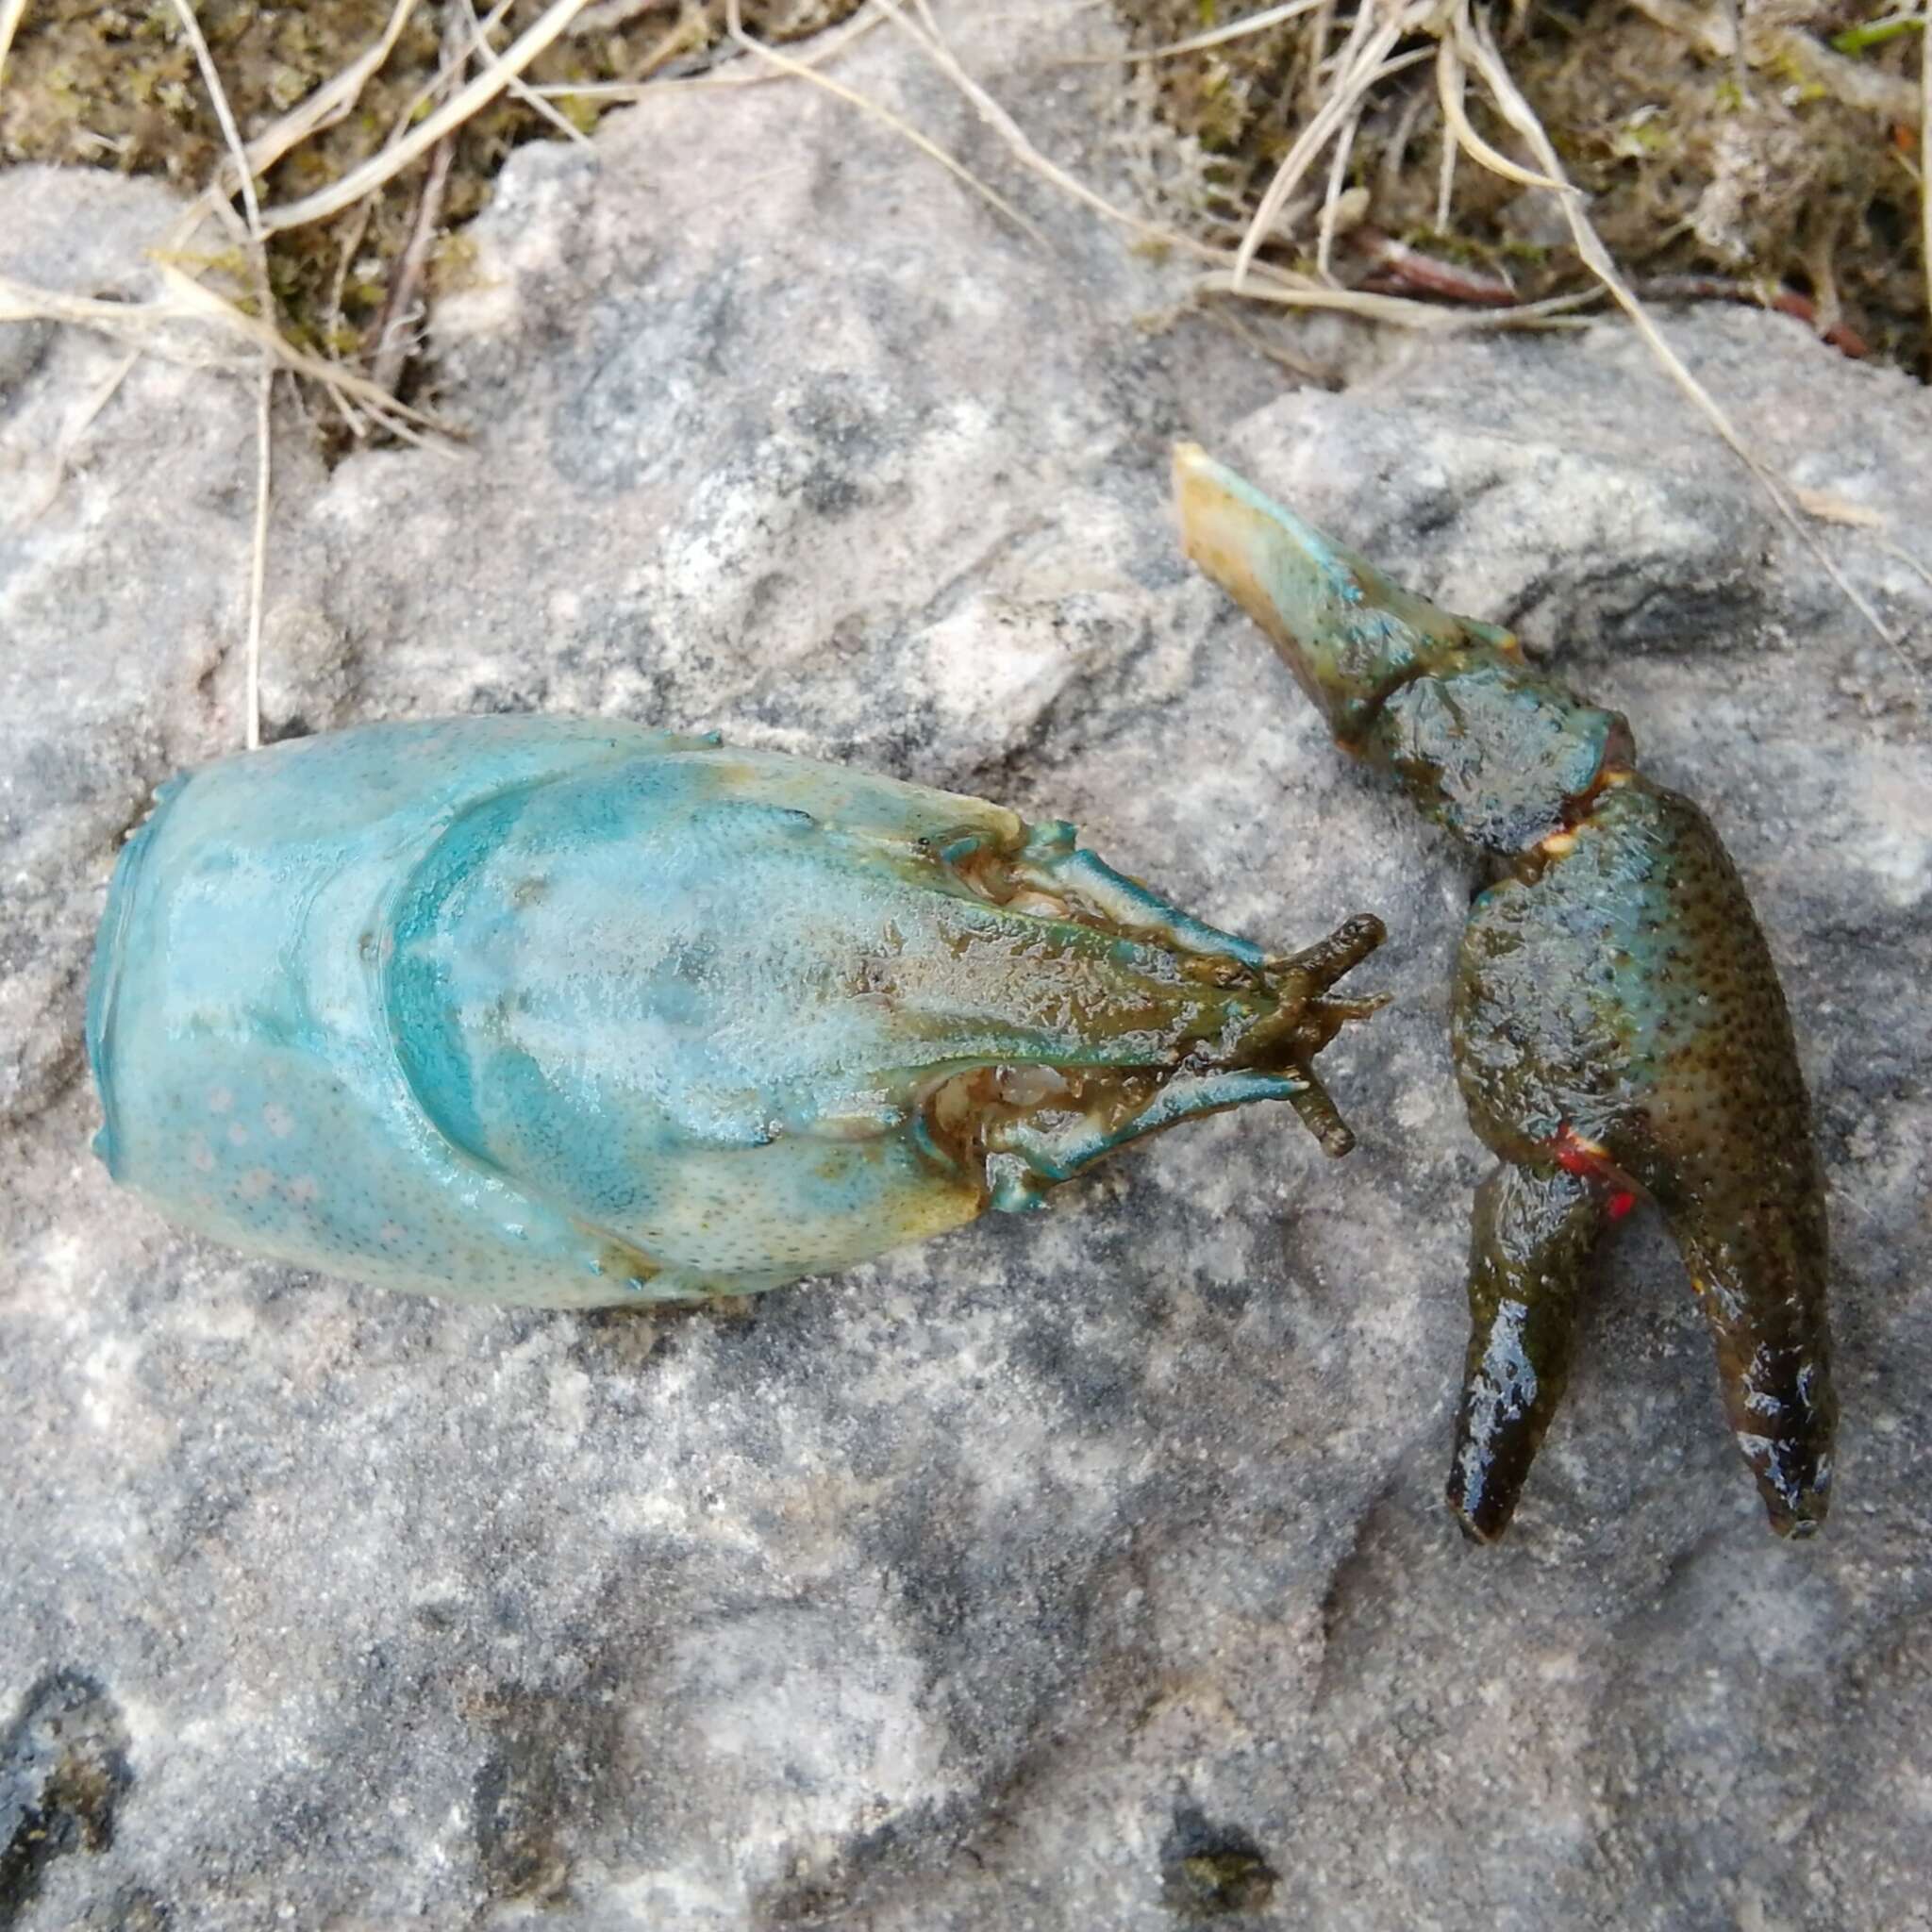 Image of Broad-clawed Crayfish